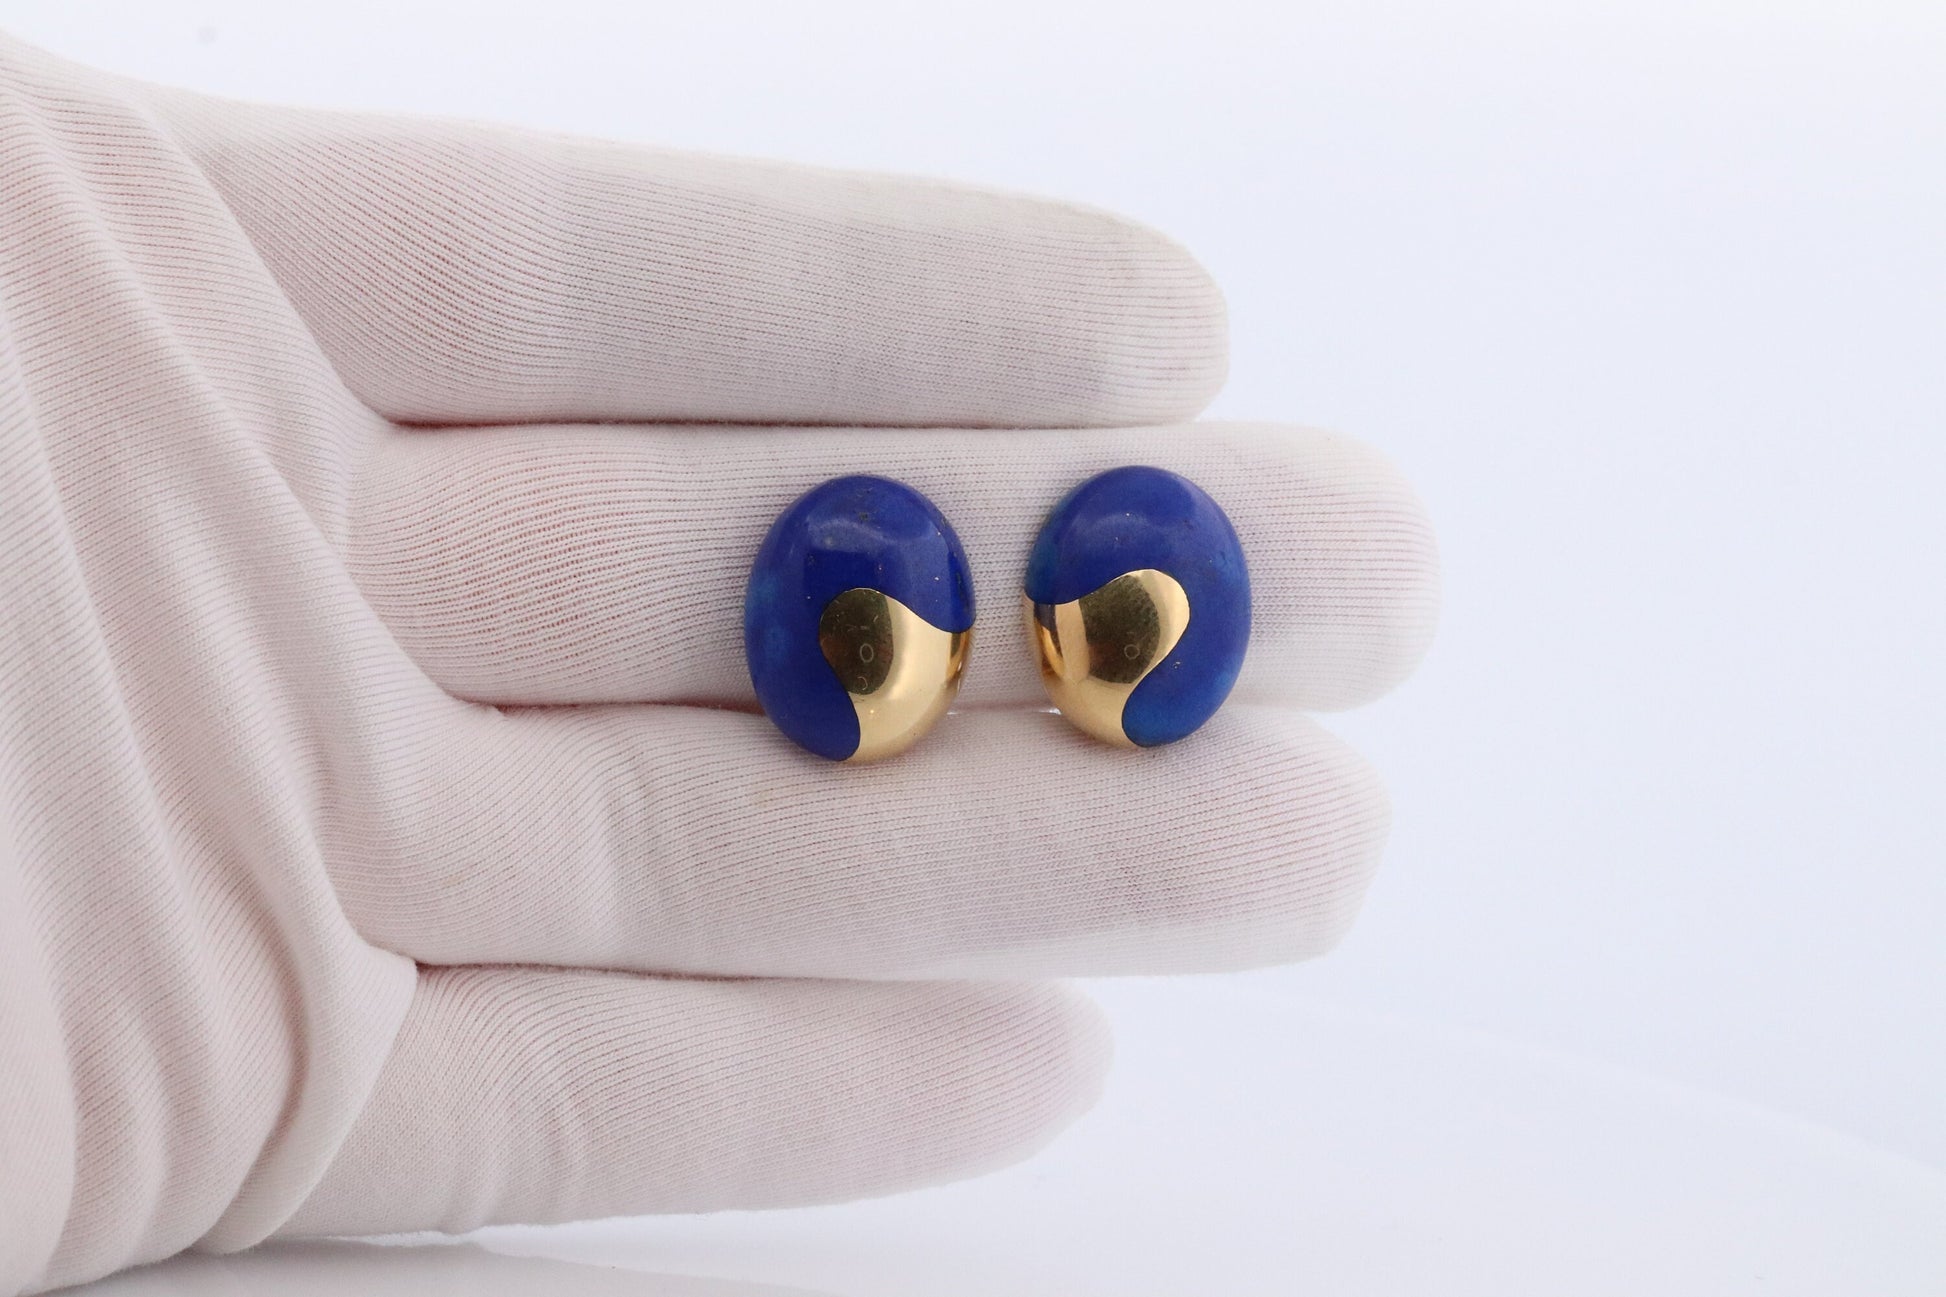 18k Tiffany and Co. Earrings. 18k Yellow Gold Lapis Lazuli Earrings. Blue Lapis Ying Yang Non Pierced Clip on Omega Clips. st(10-06)